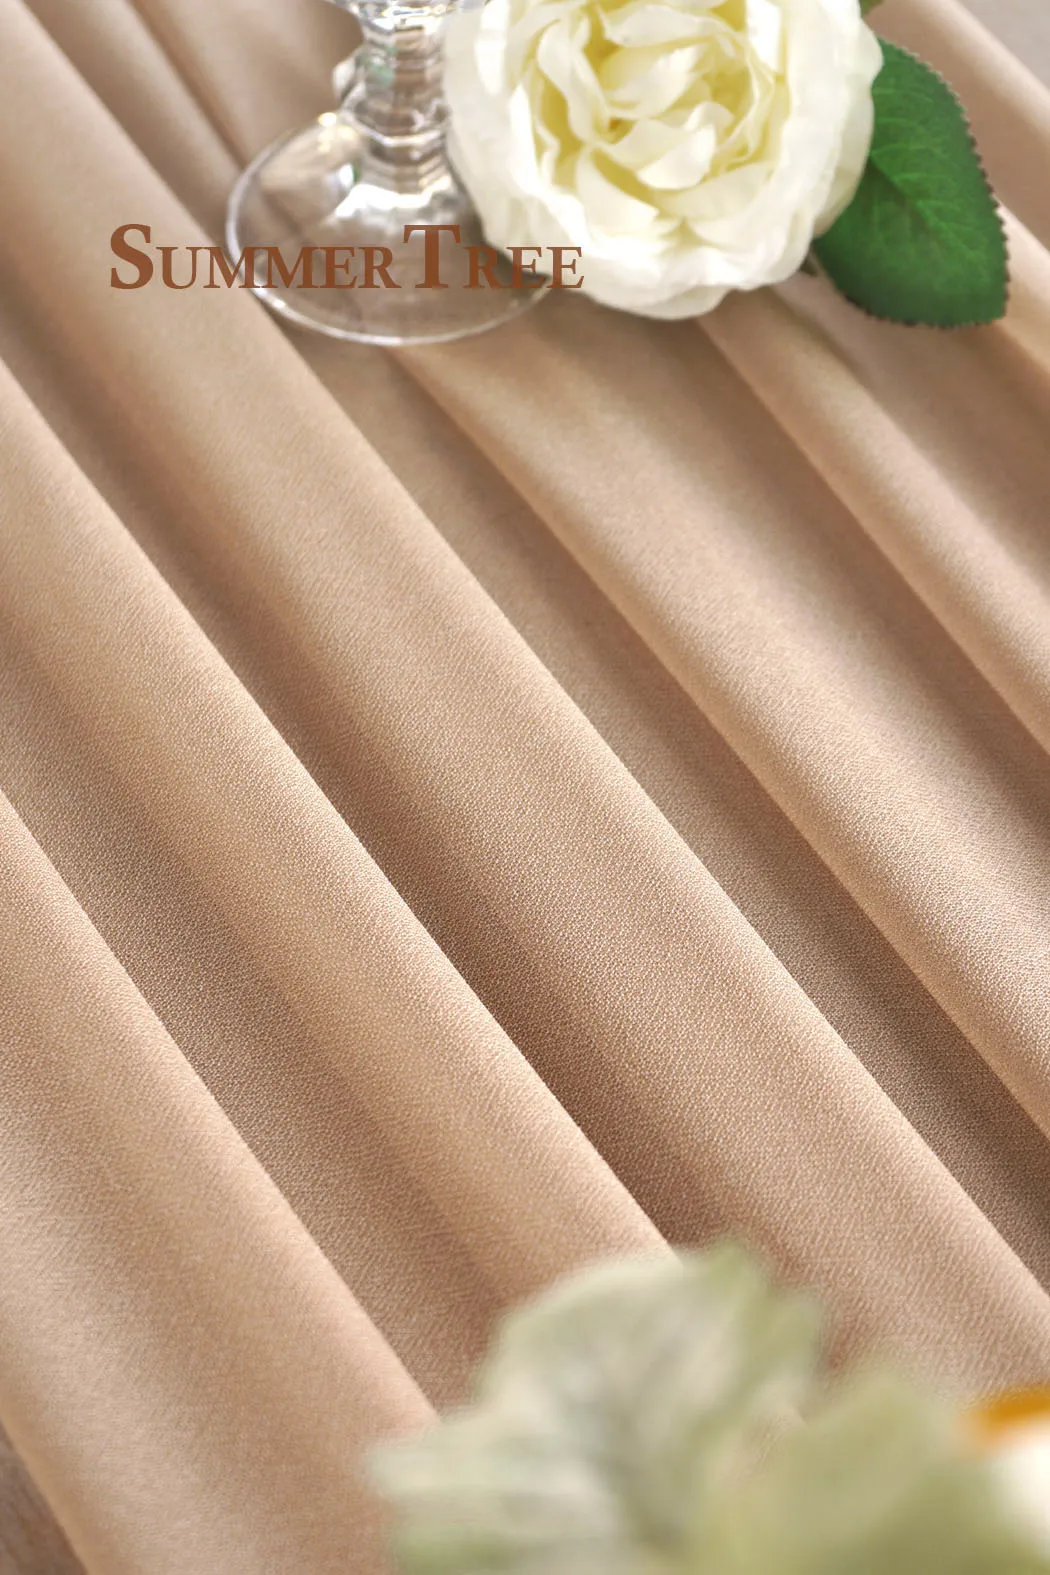 pink curtains 6-10 Meters Wedding Arch Drape Chiffon Fabric Draping Curtain Drapery Party Supplies Ceremony Reception Hanging Decoration white blackout curtains Curtains